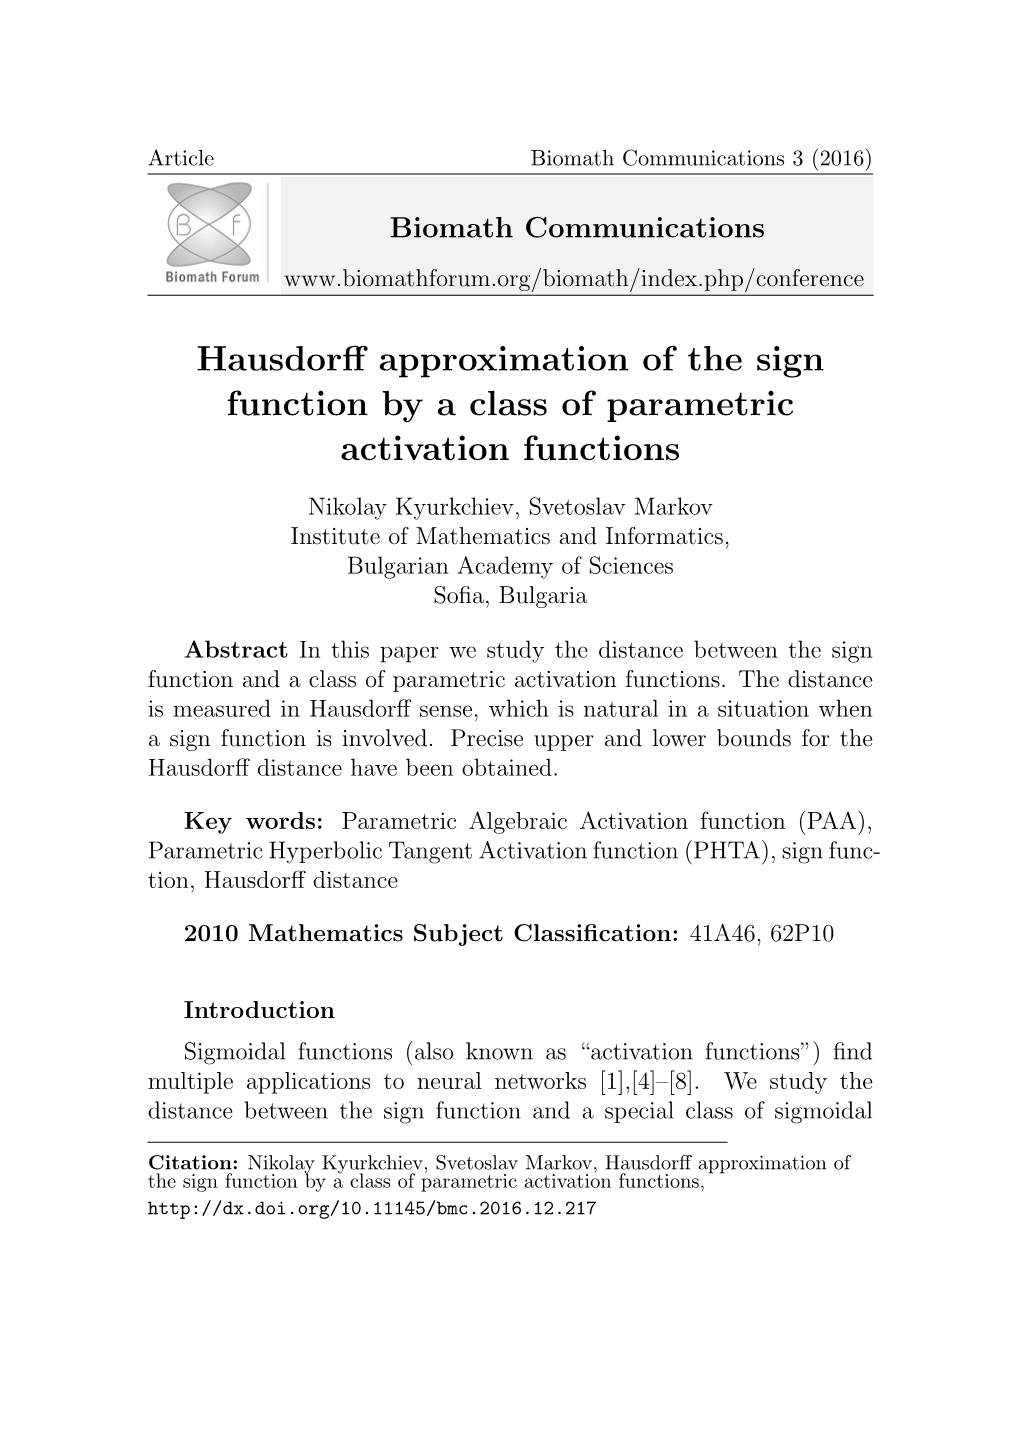 Hausdorff Approximation of the Sign Function by a Class of Parametric